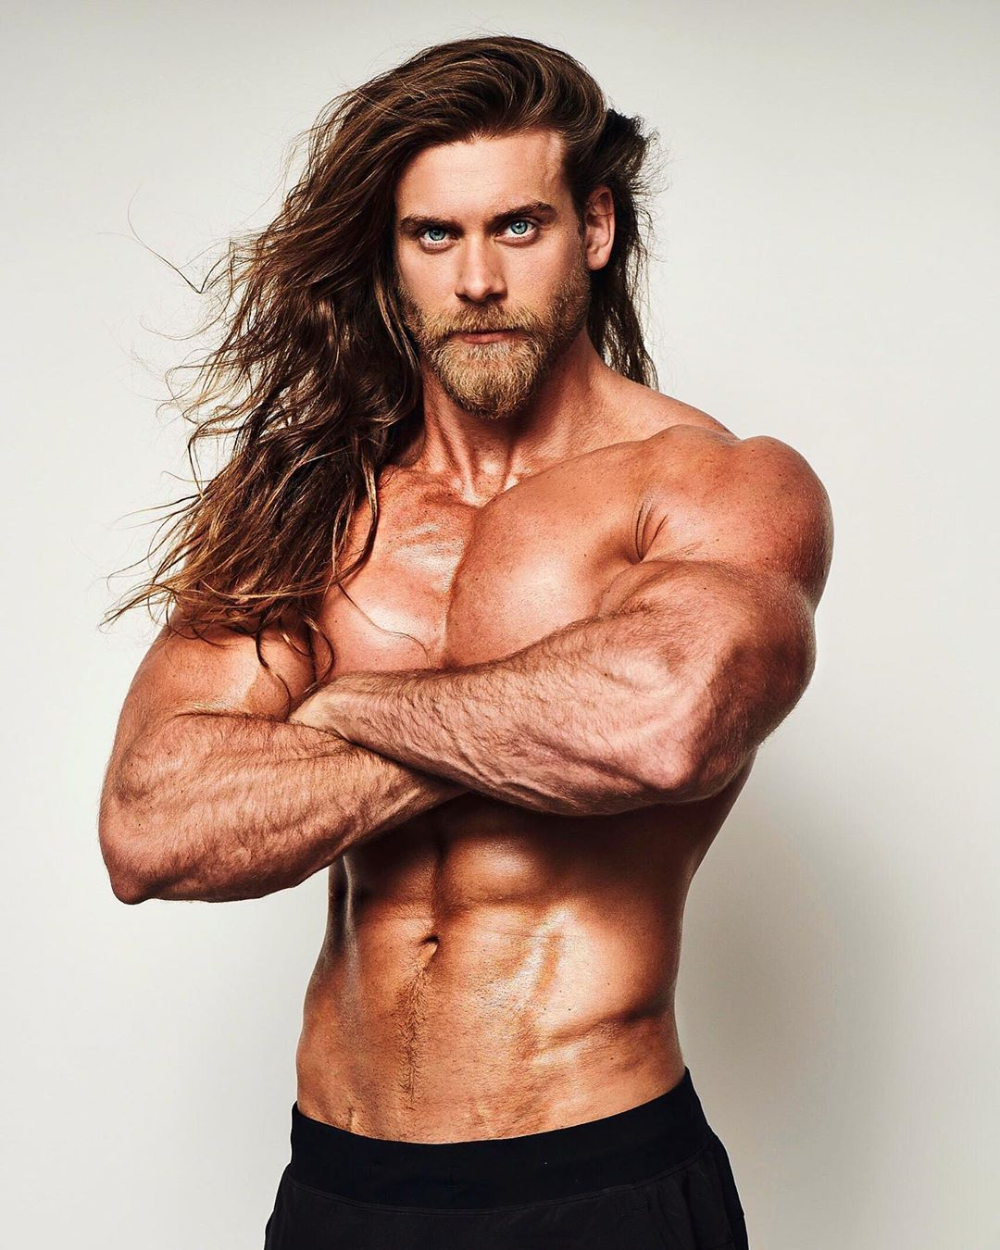 Brock O'Hurn posing and flexing his abs and muscles for a magazine